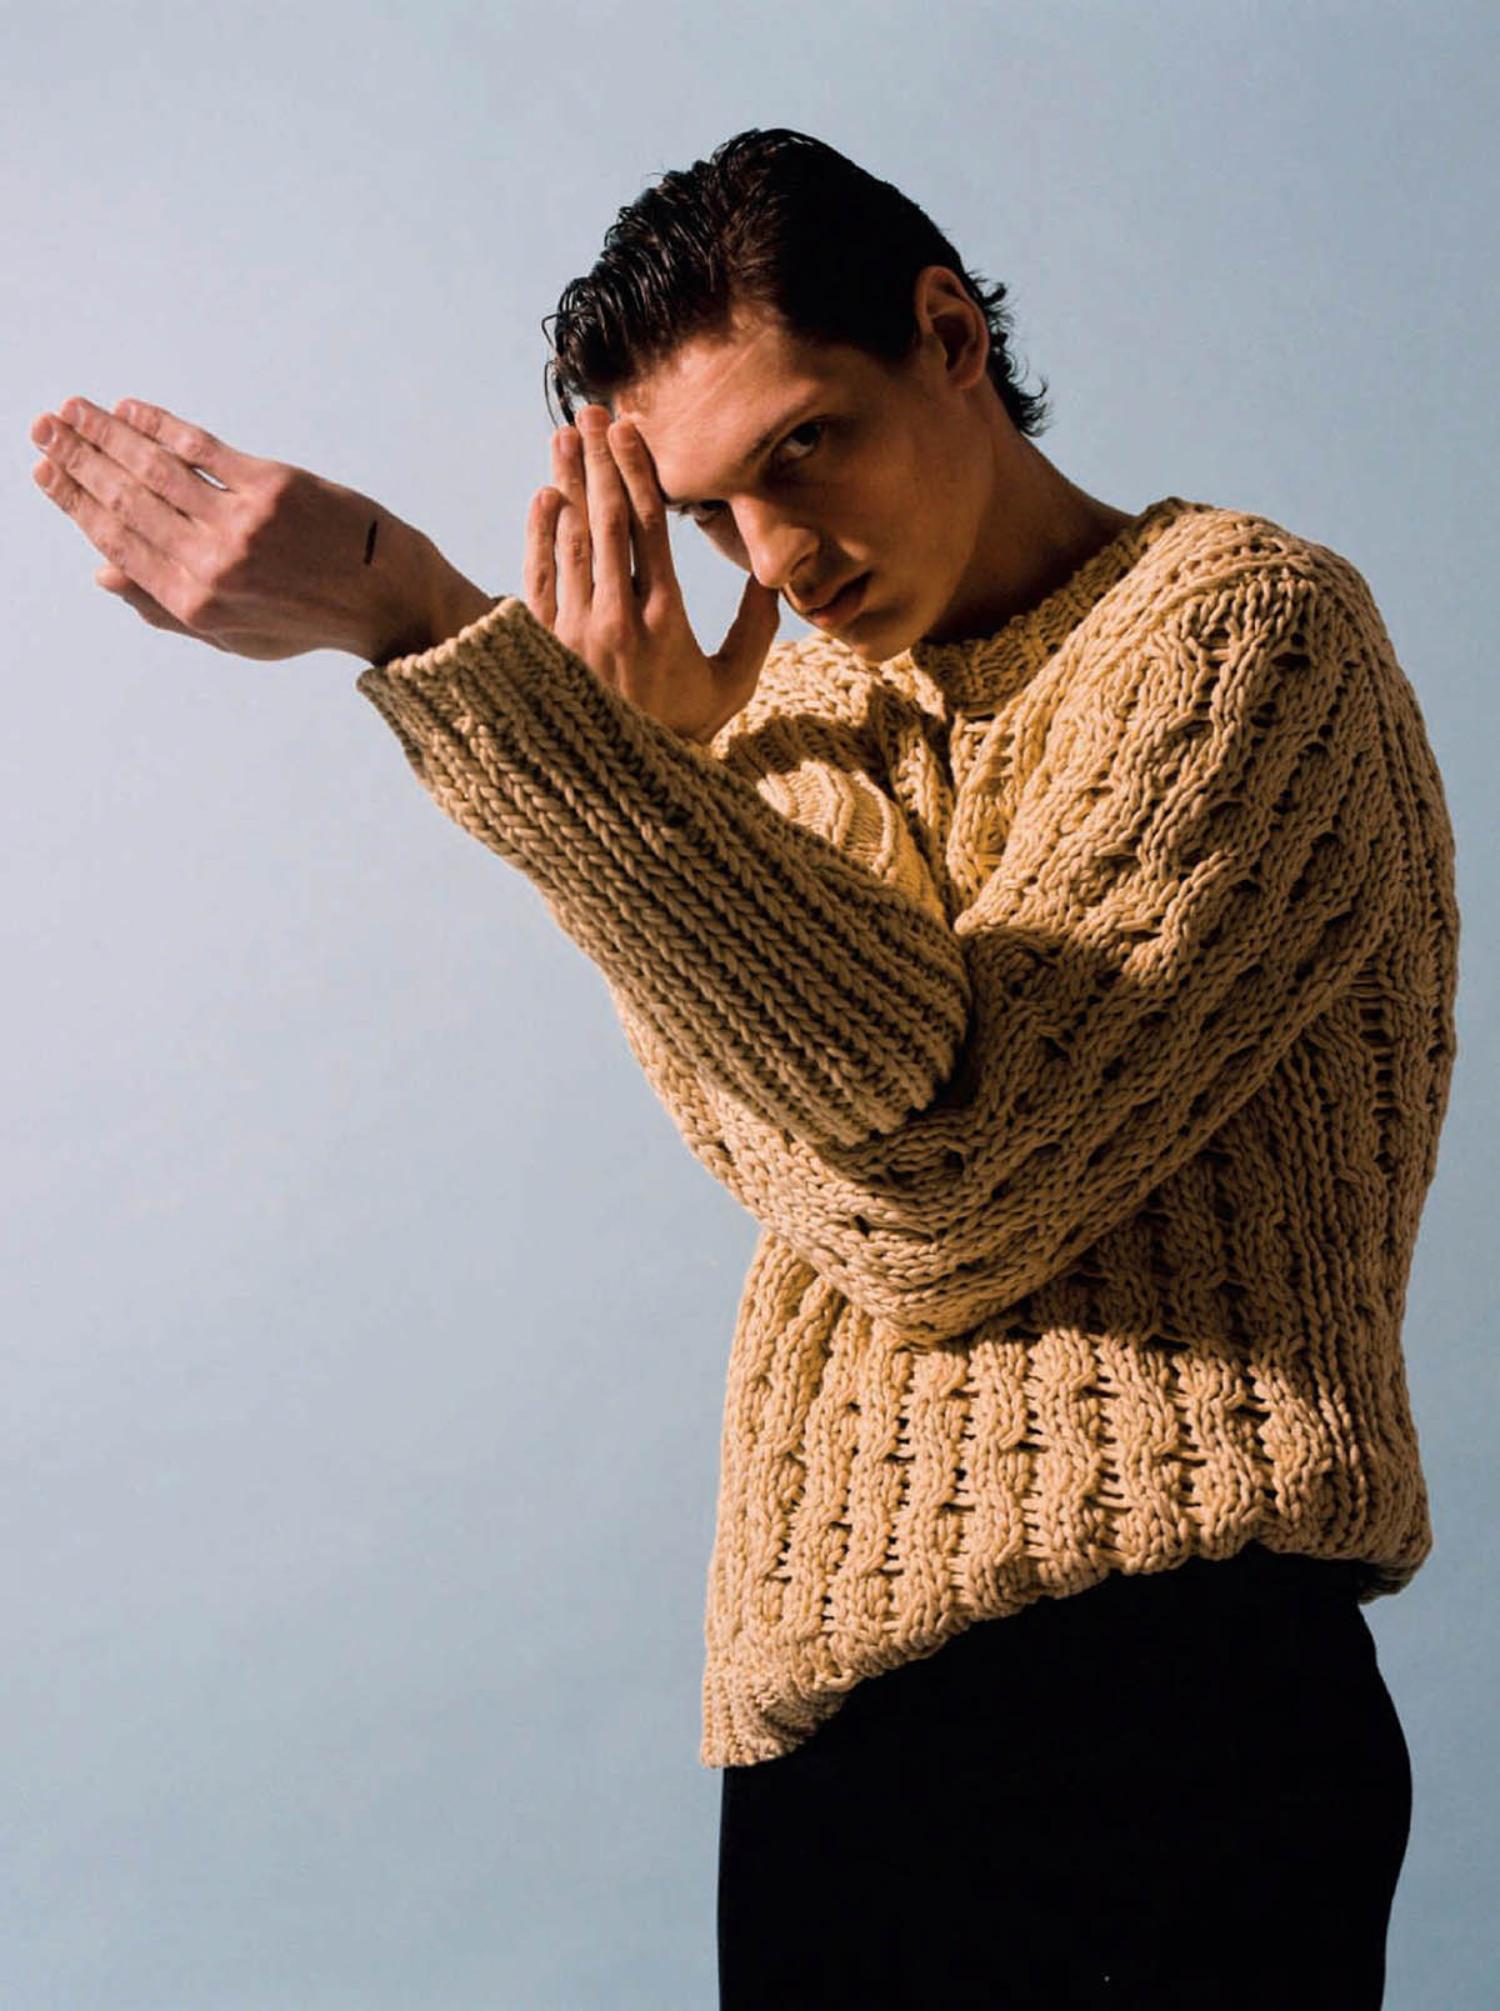 It's Street Life: Valentin Caron by Javier Castan for Esquire Espana March 2021